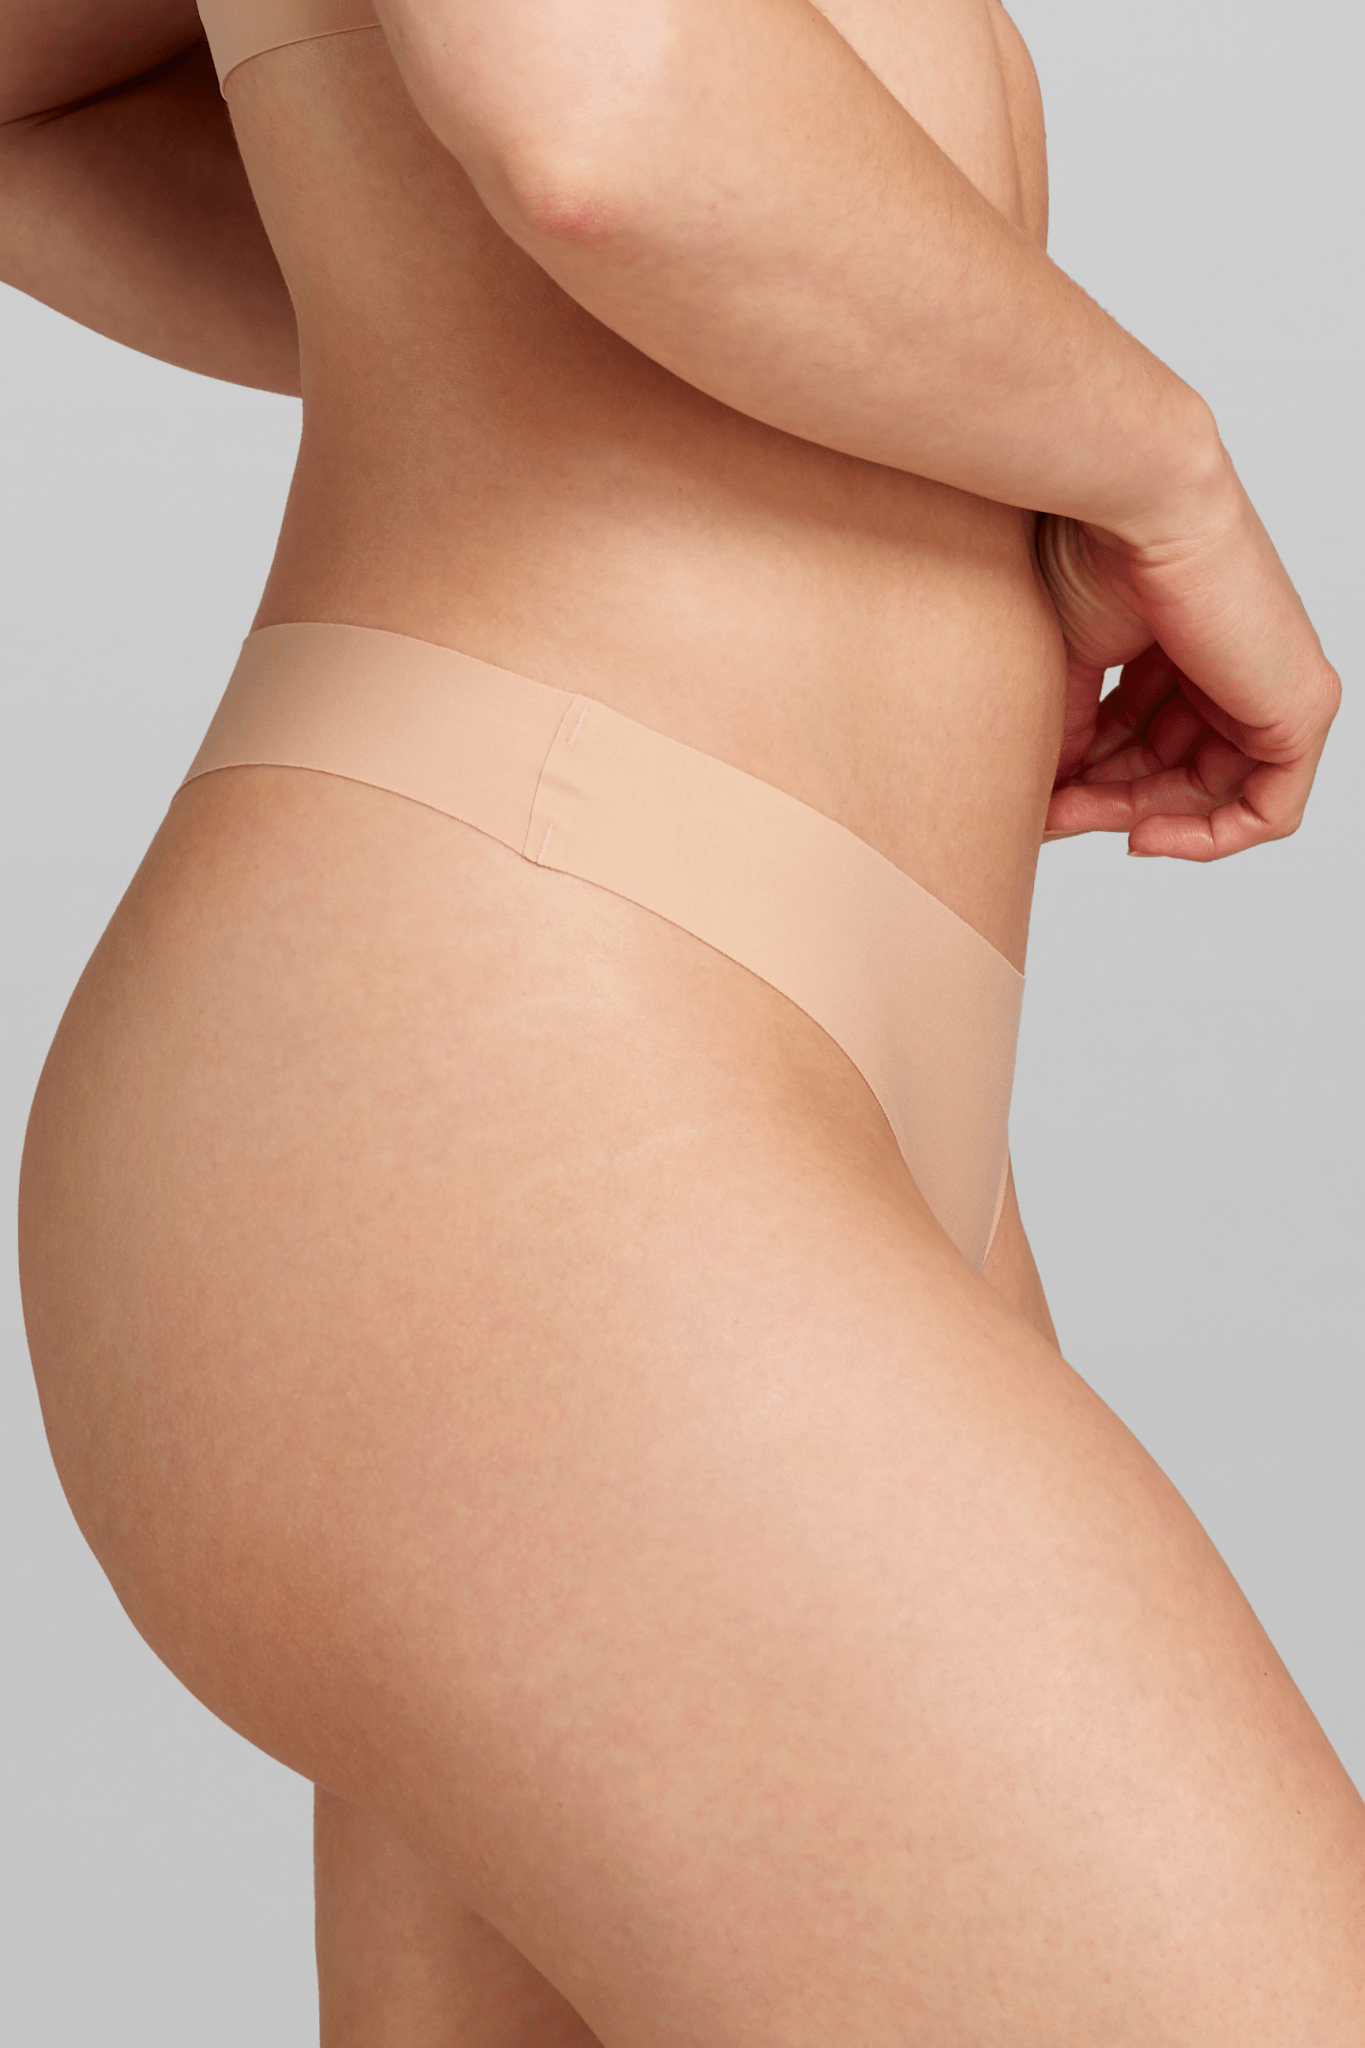 Calvin Klein Women's Invisibles Thong Panty, Assorted Colors